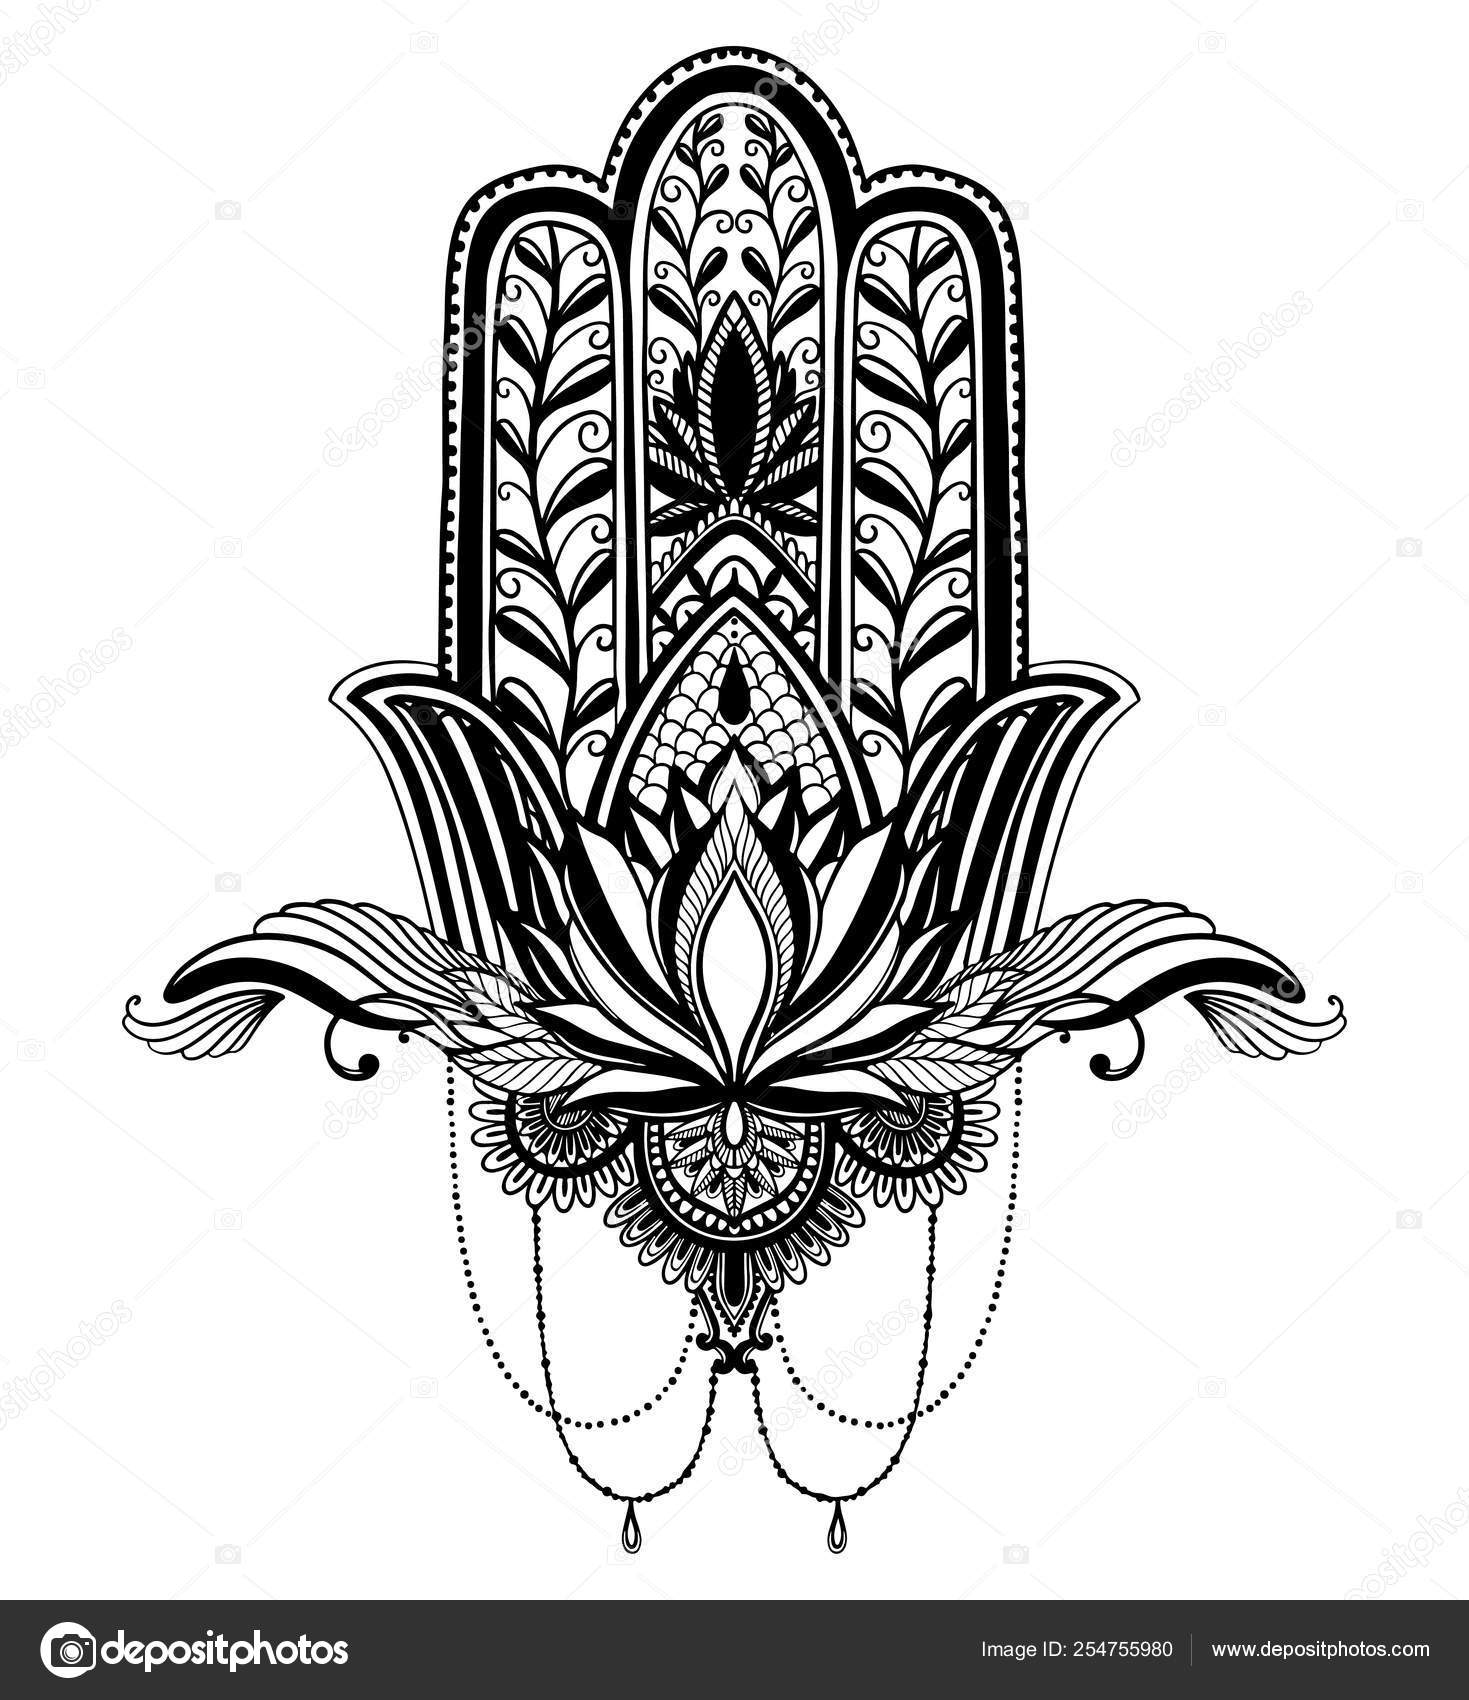 Pin by kevin clark on Outlines | Hamsa tattoo design, Hamsa hand tattoo,  Mandala tattoo design